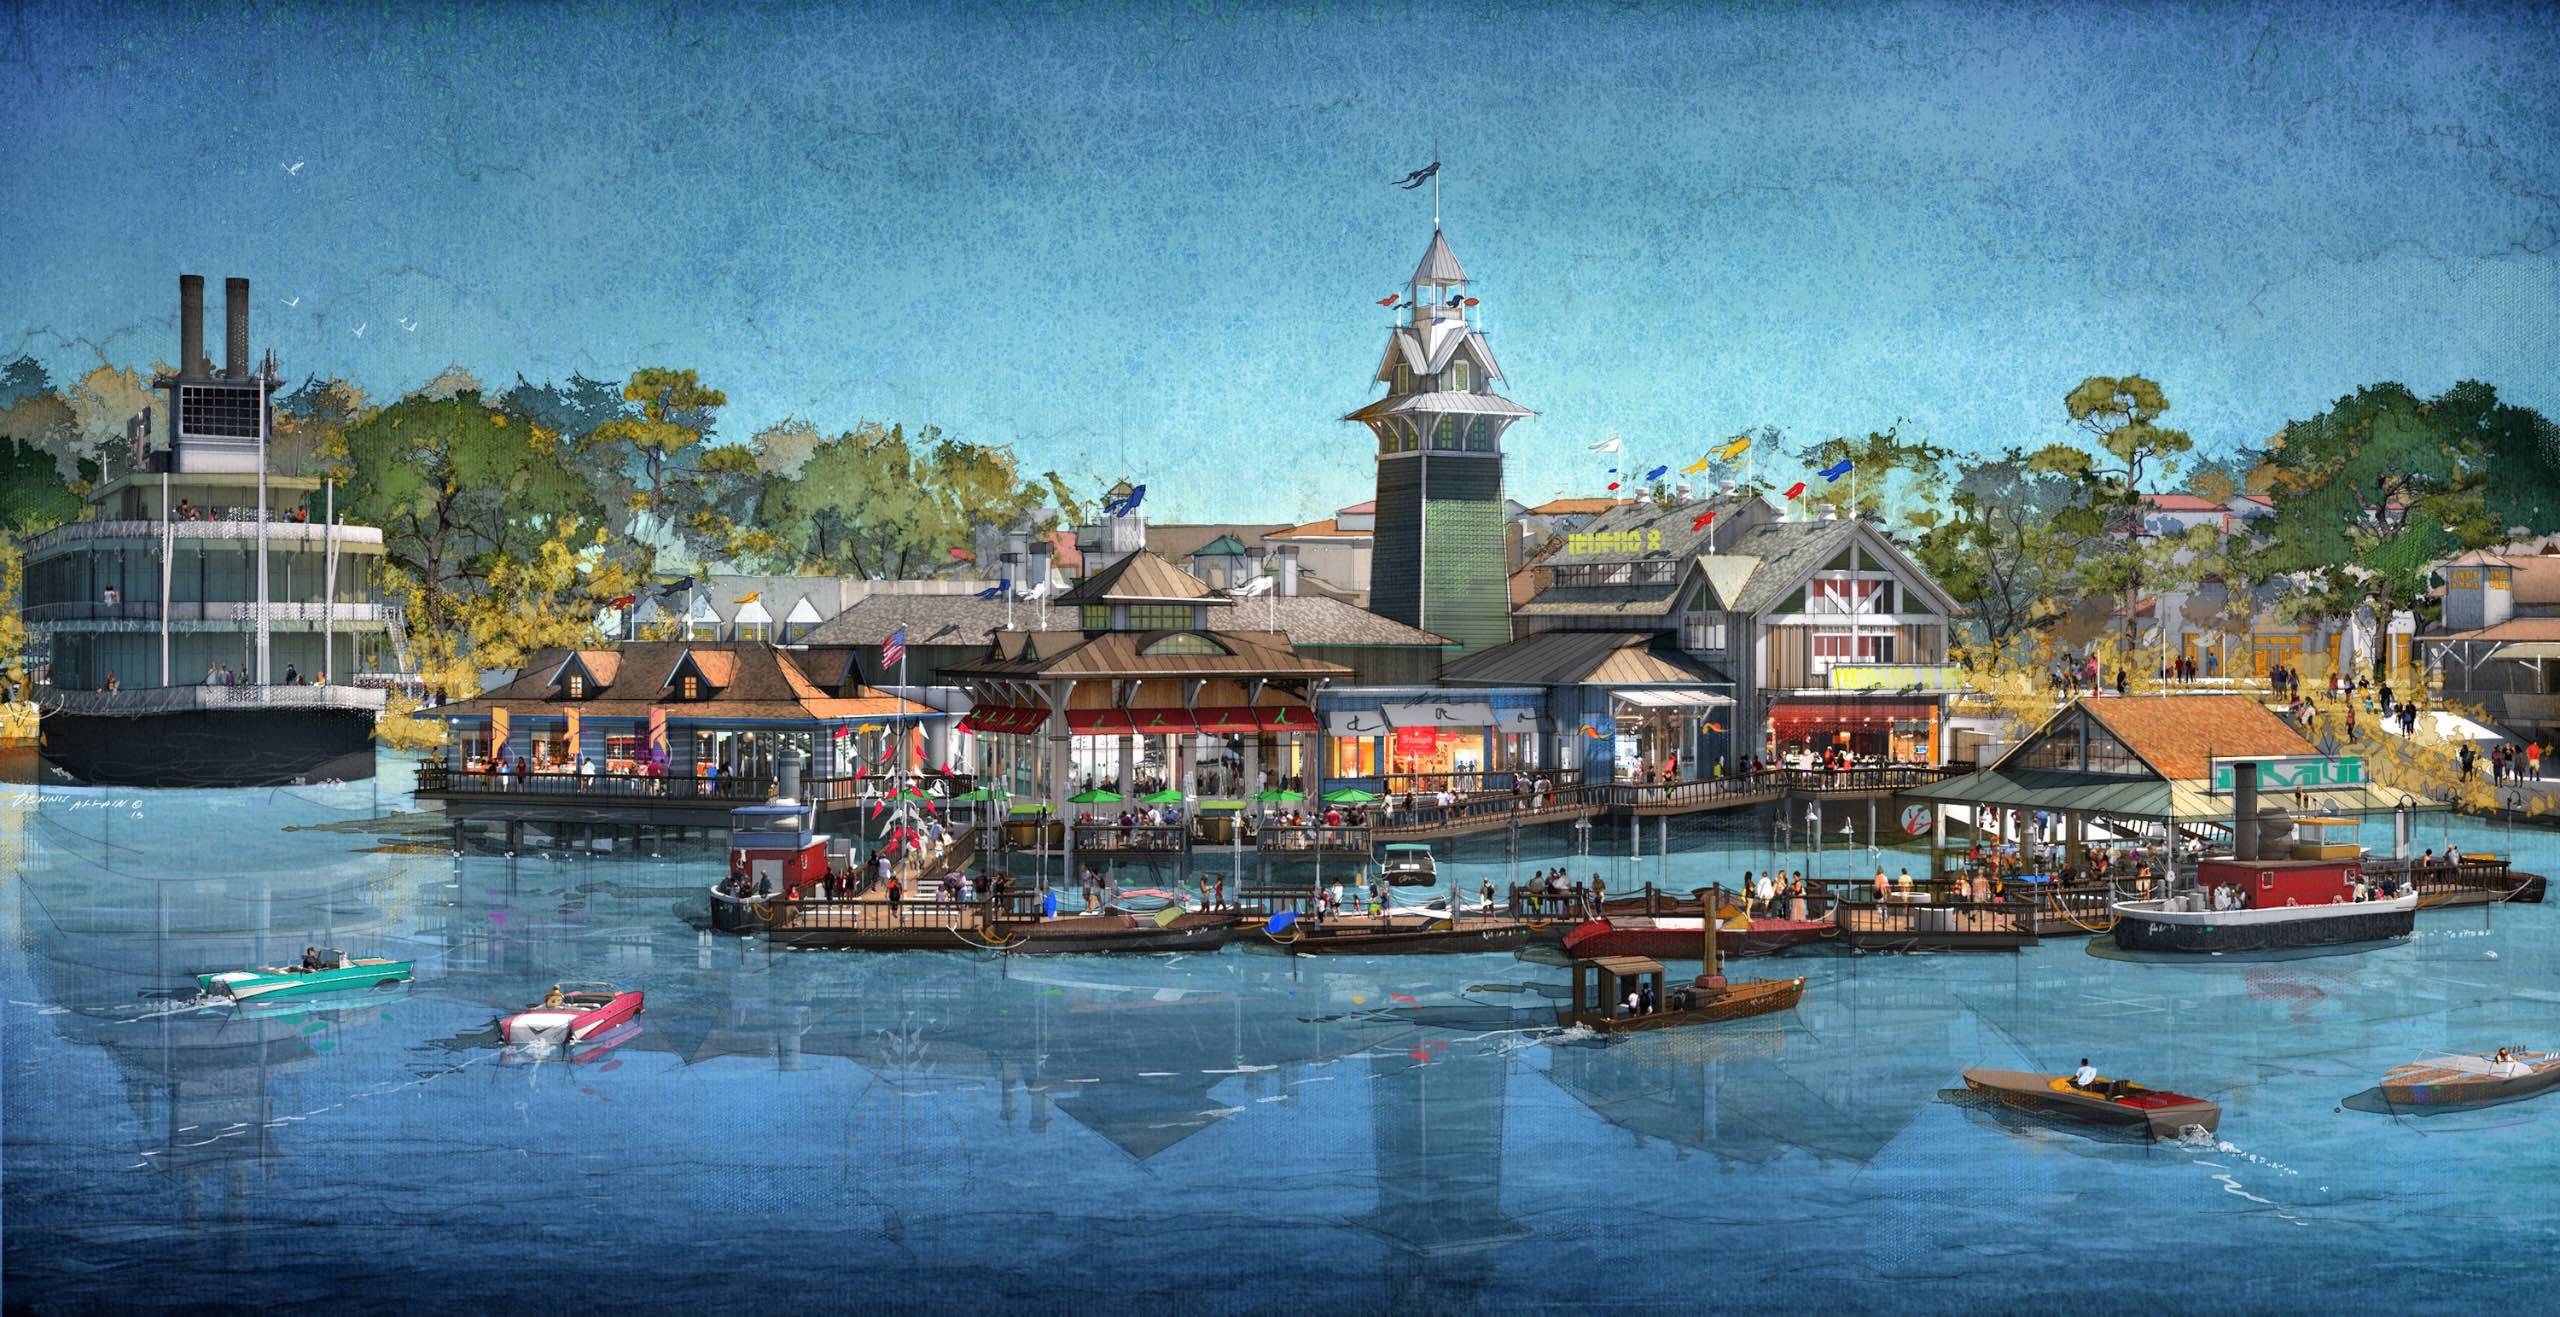 The BOATHOUSE restaurant confirmed for Disney Springs in 2015